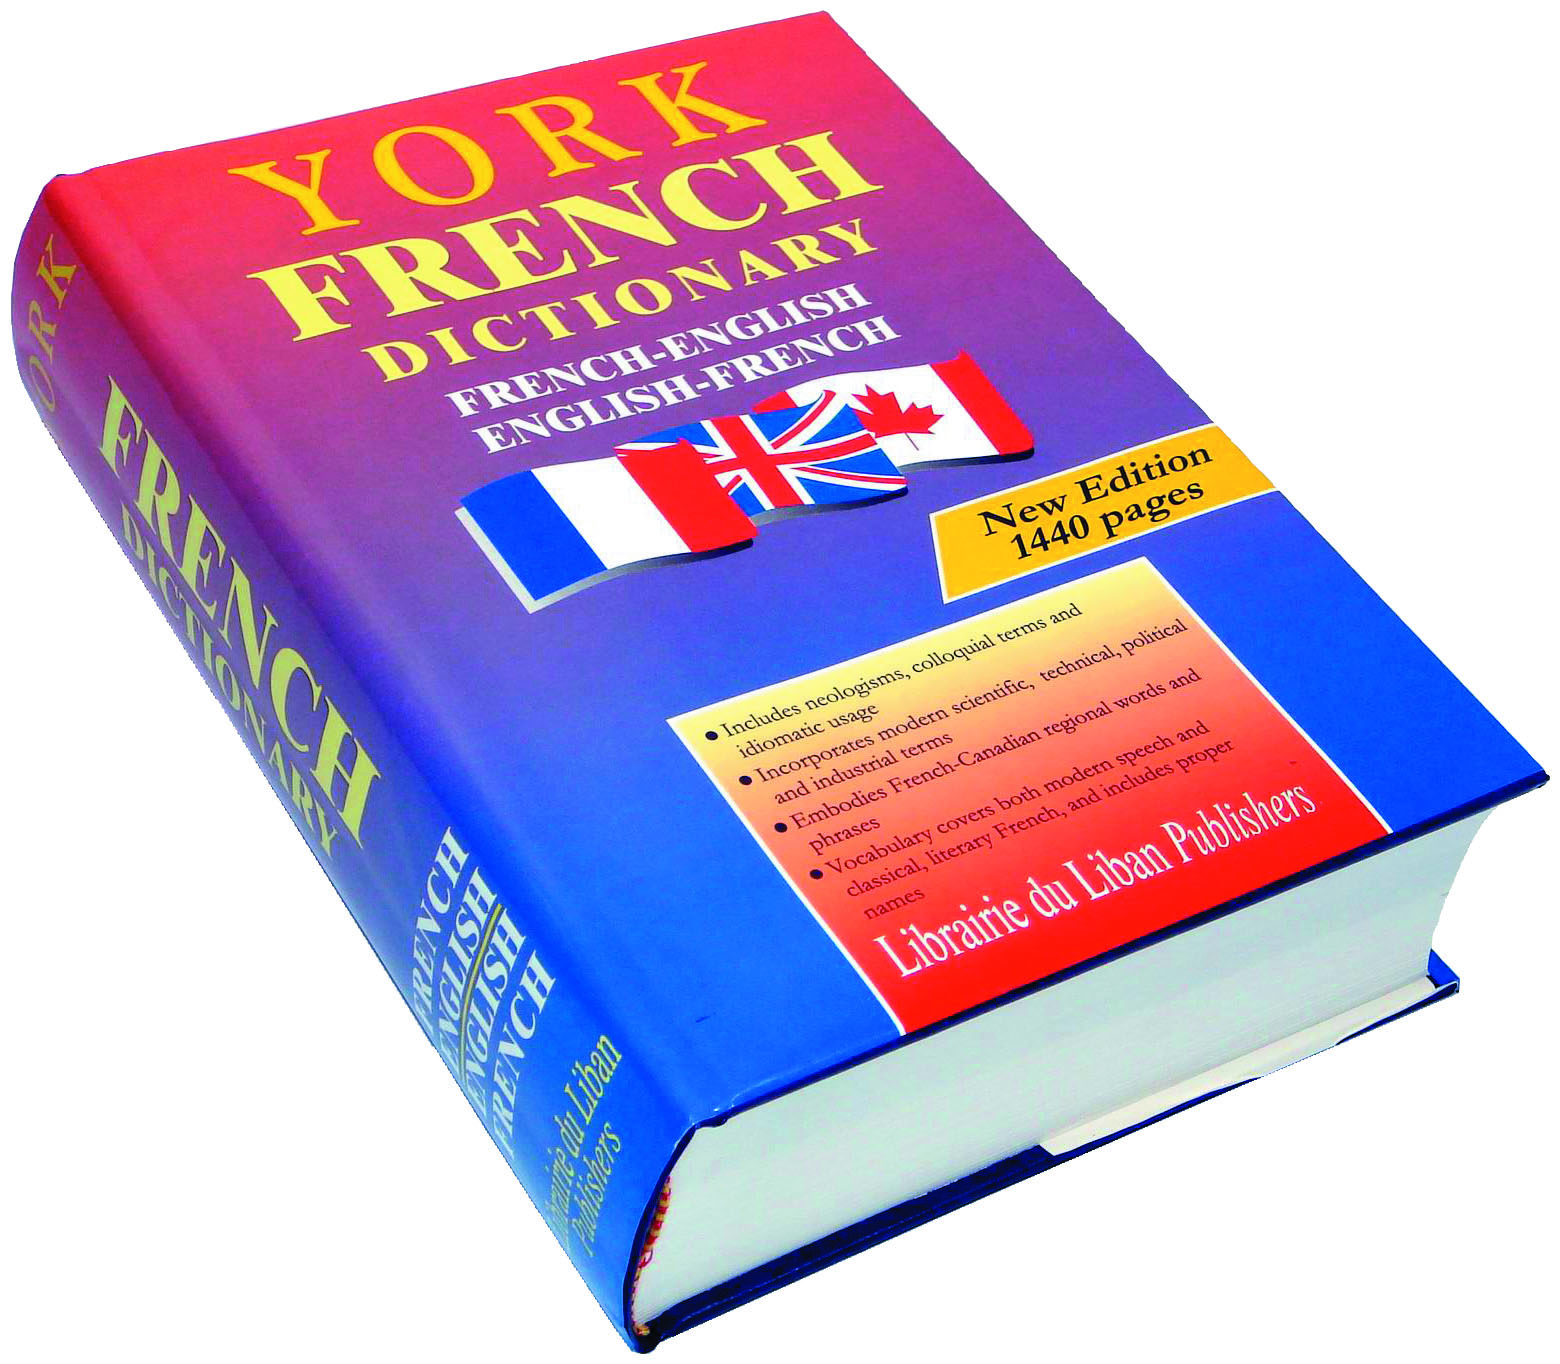 York dictionary of French-English/English-French